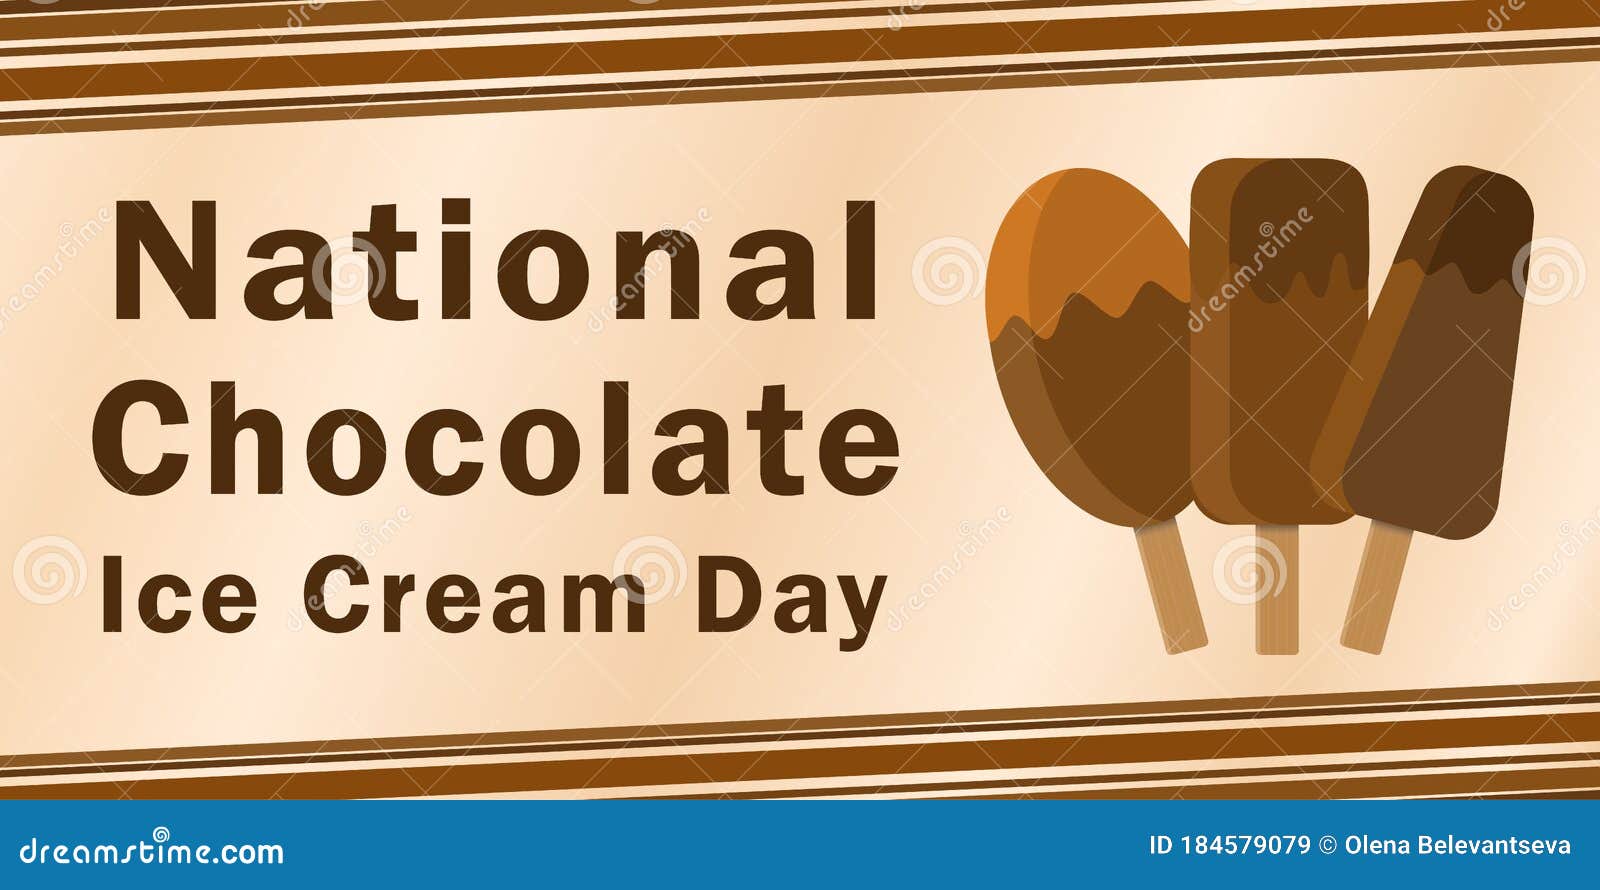 National Chocolate Ice Cream Day is Traditionally Celebrated in the